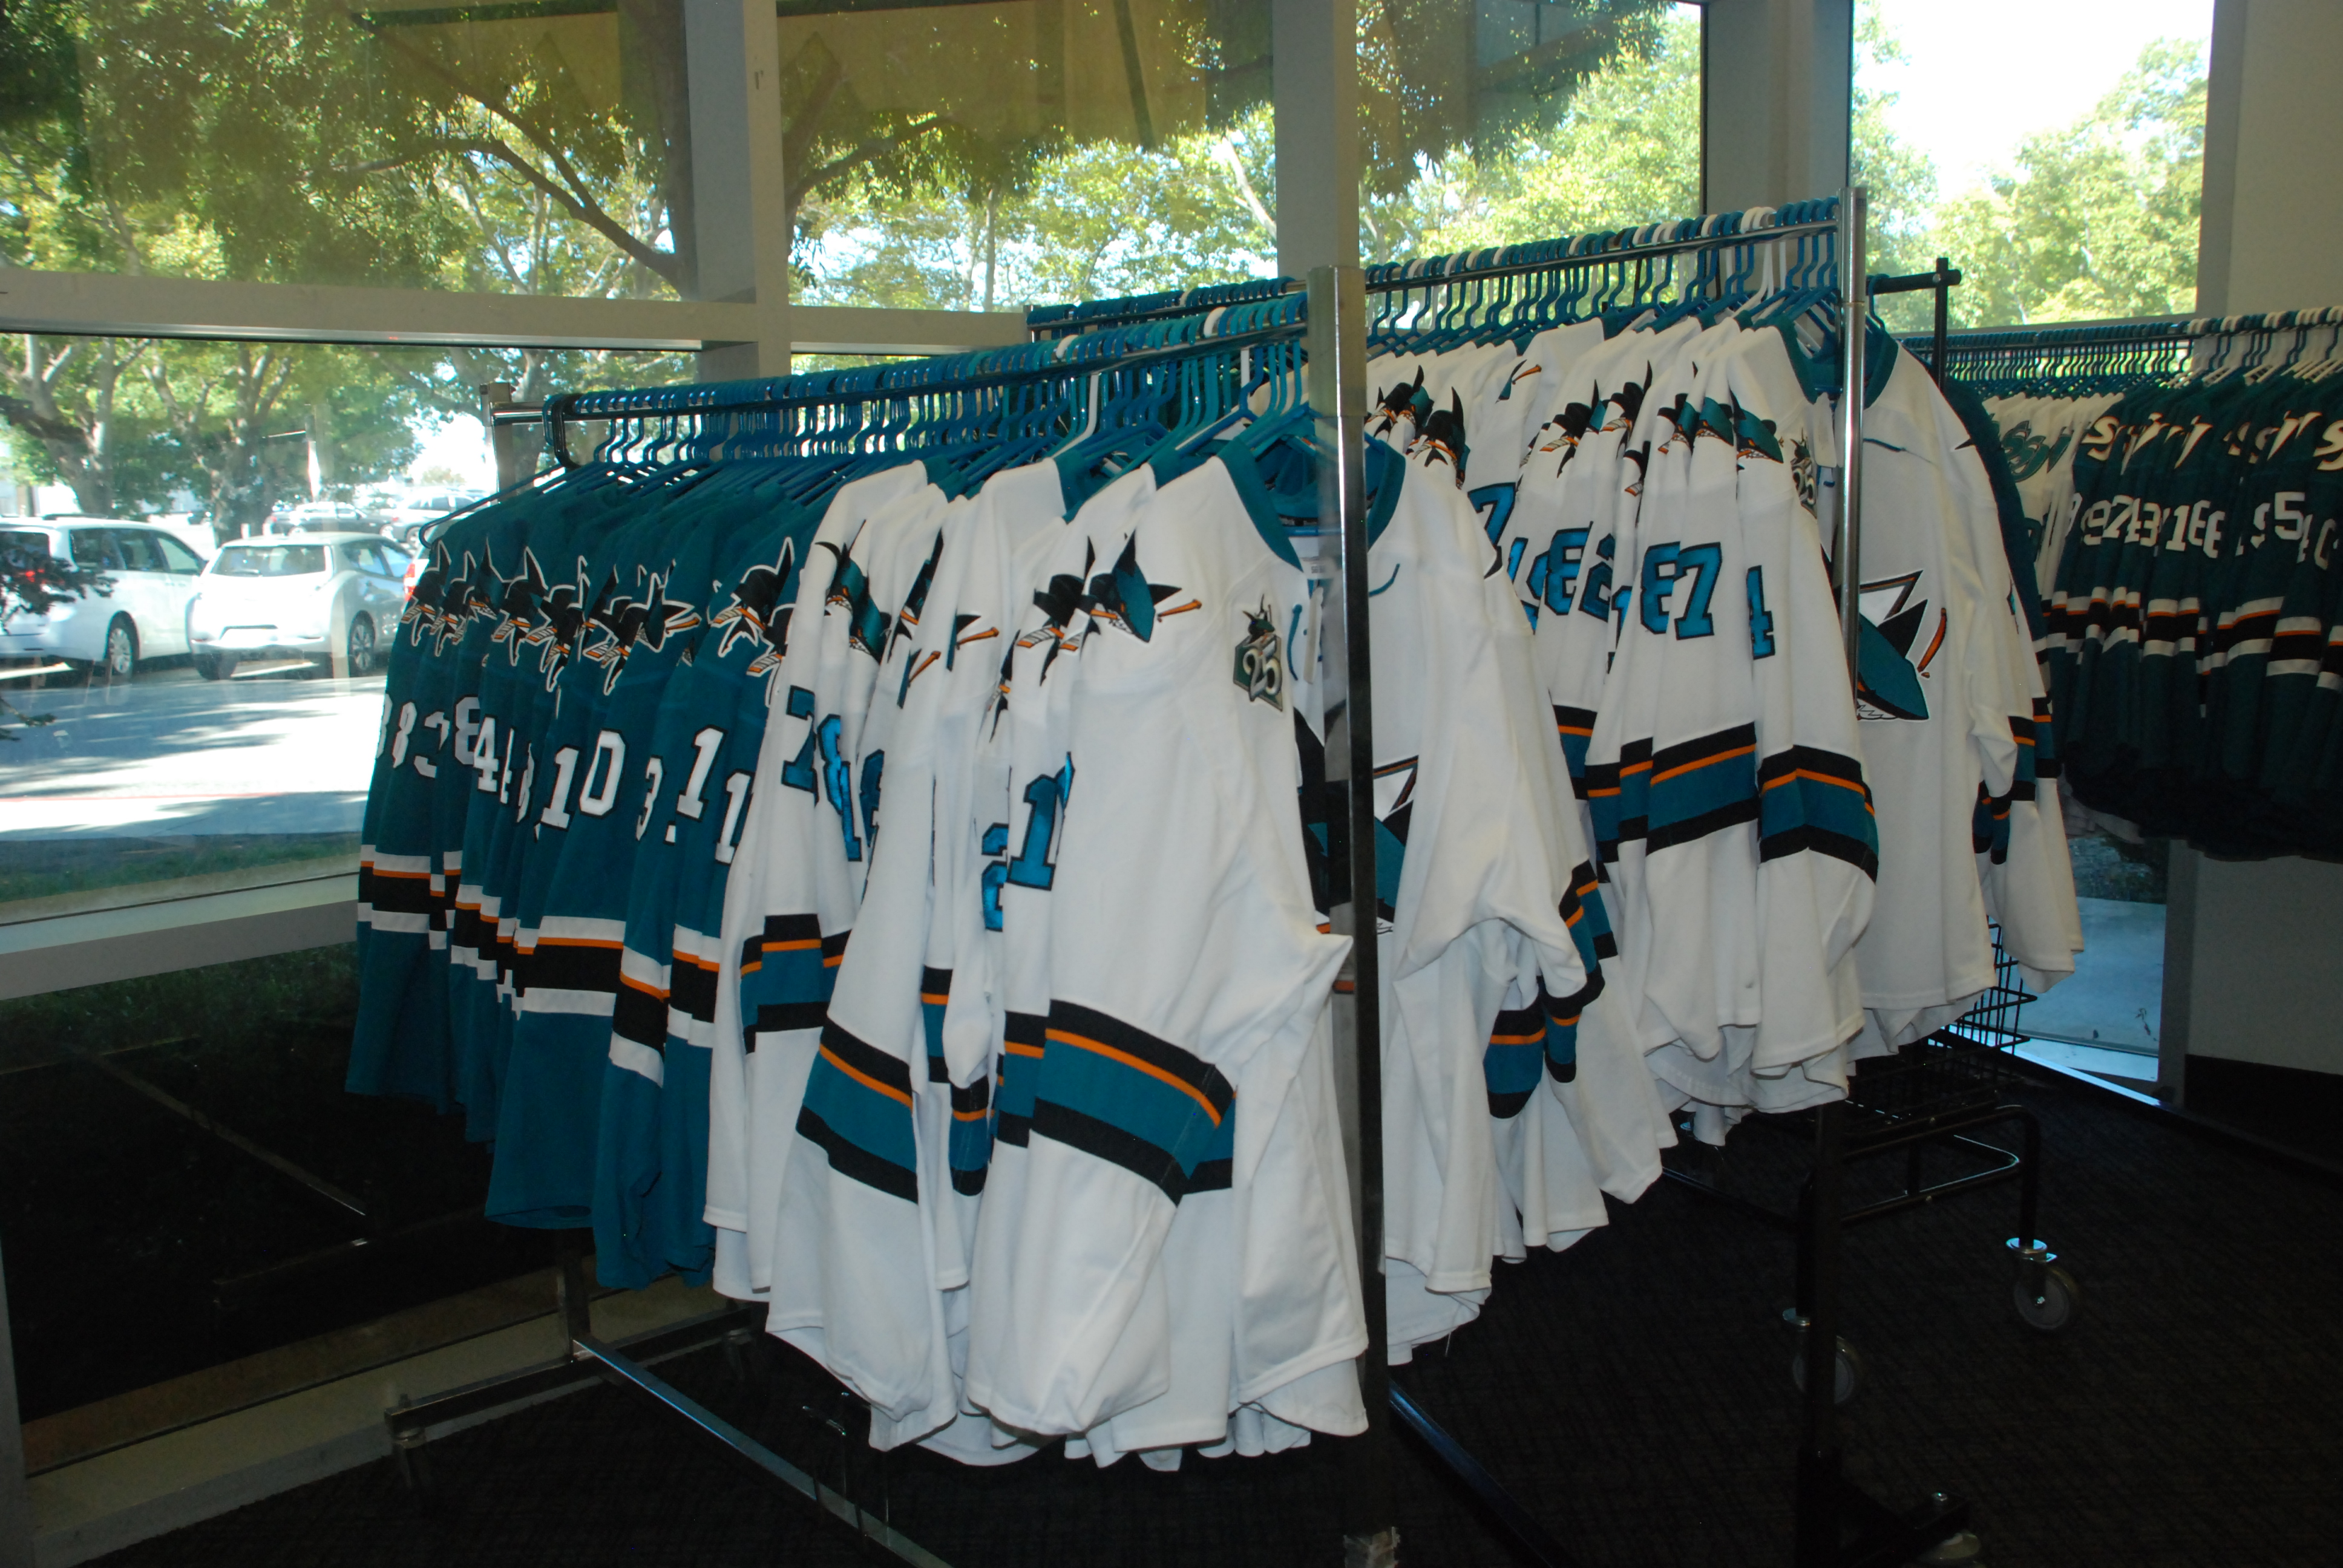 game used nhl jerseys